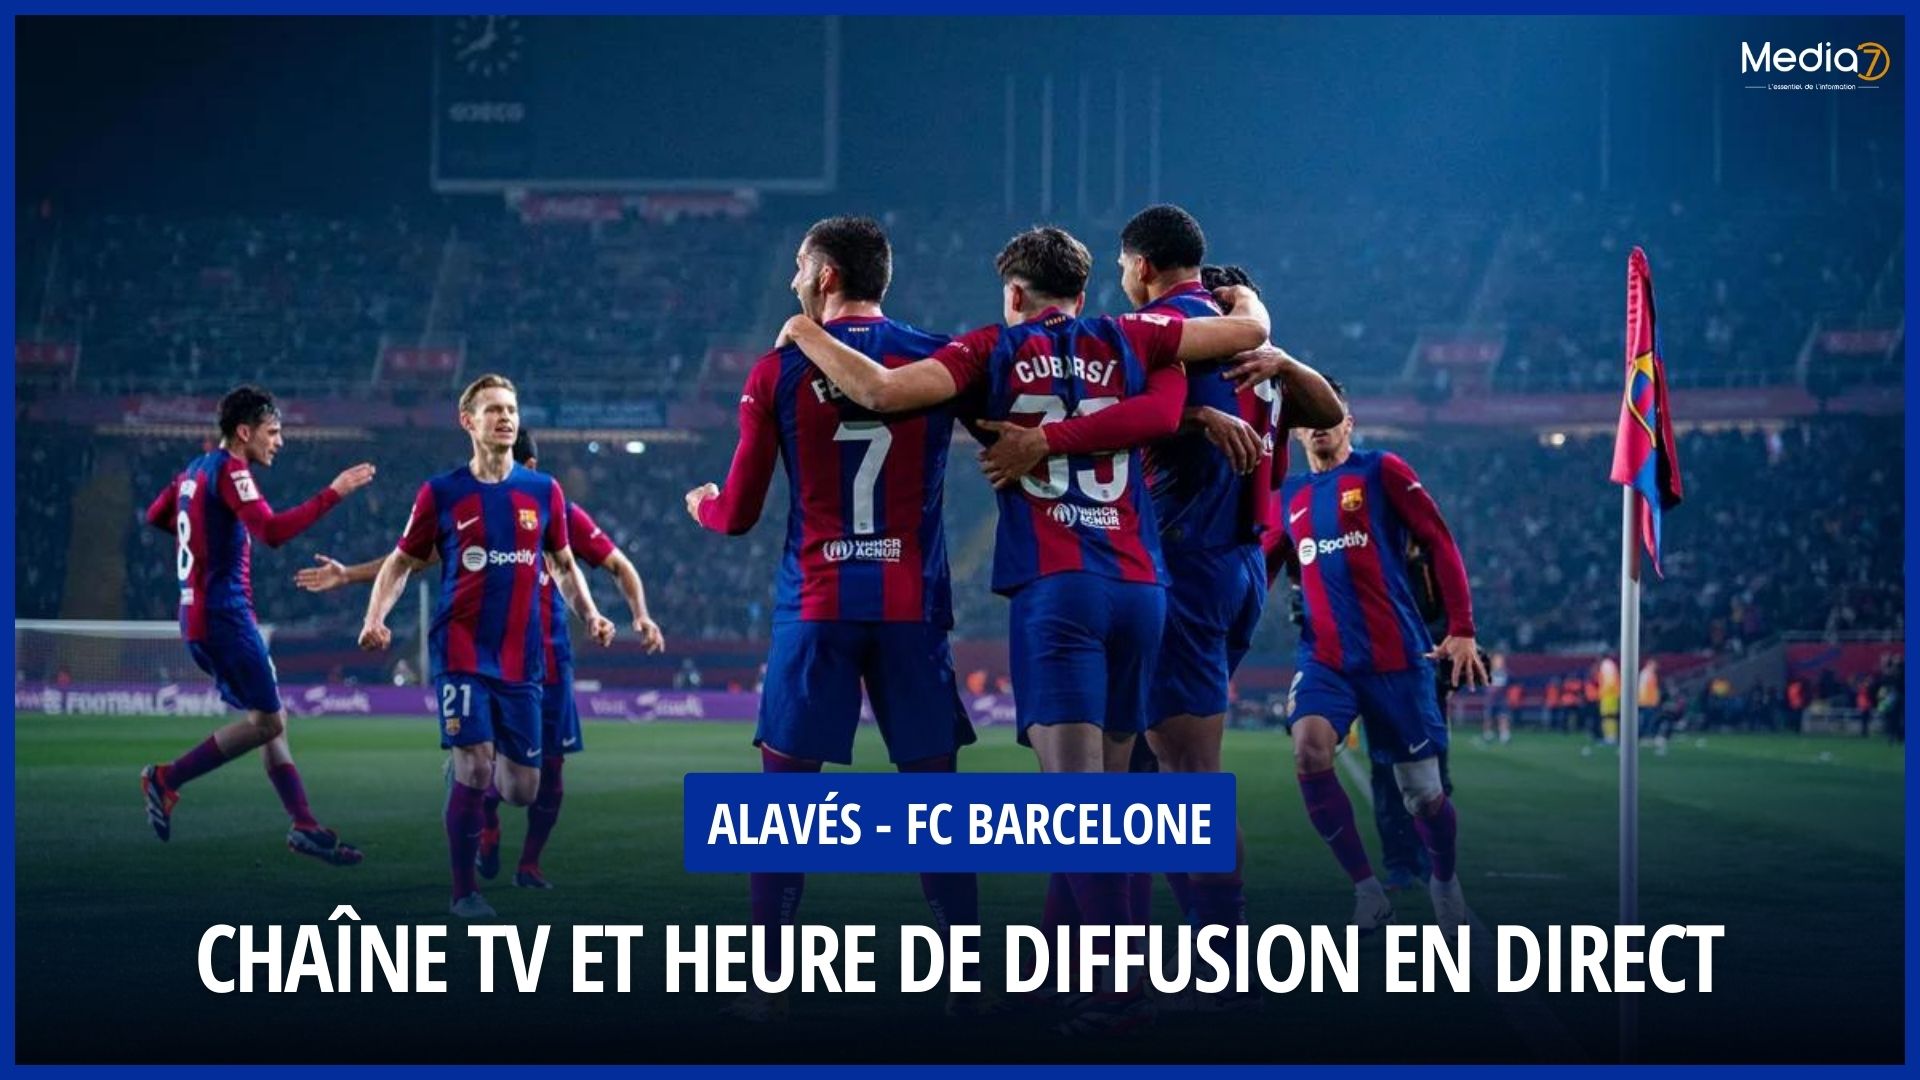 Match Alavés - FC Barcelona Live: TV Broadcast & Streaming, Schedule and Channel - Media7